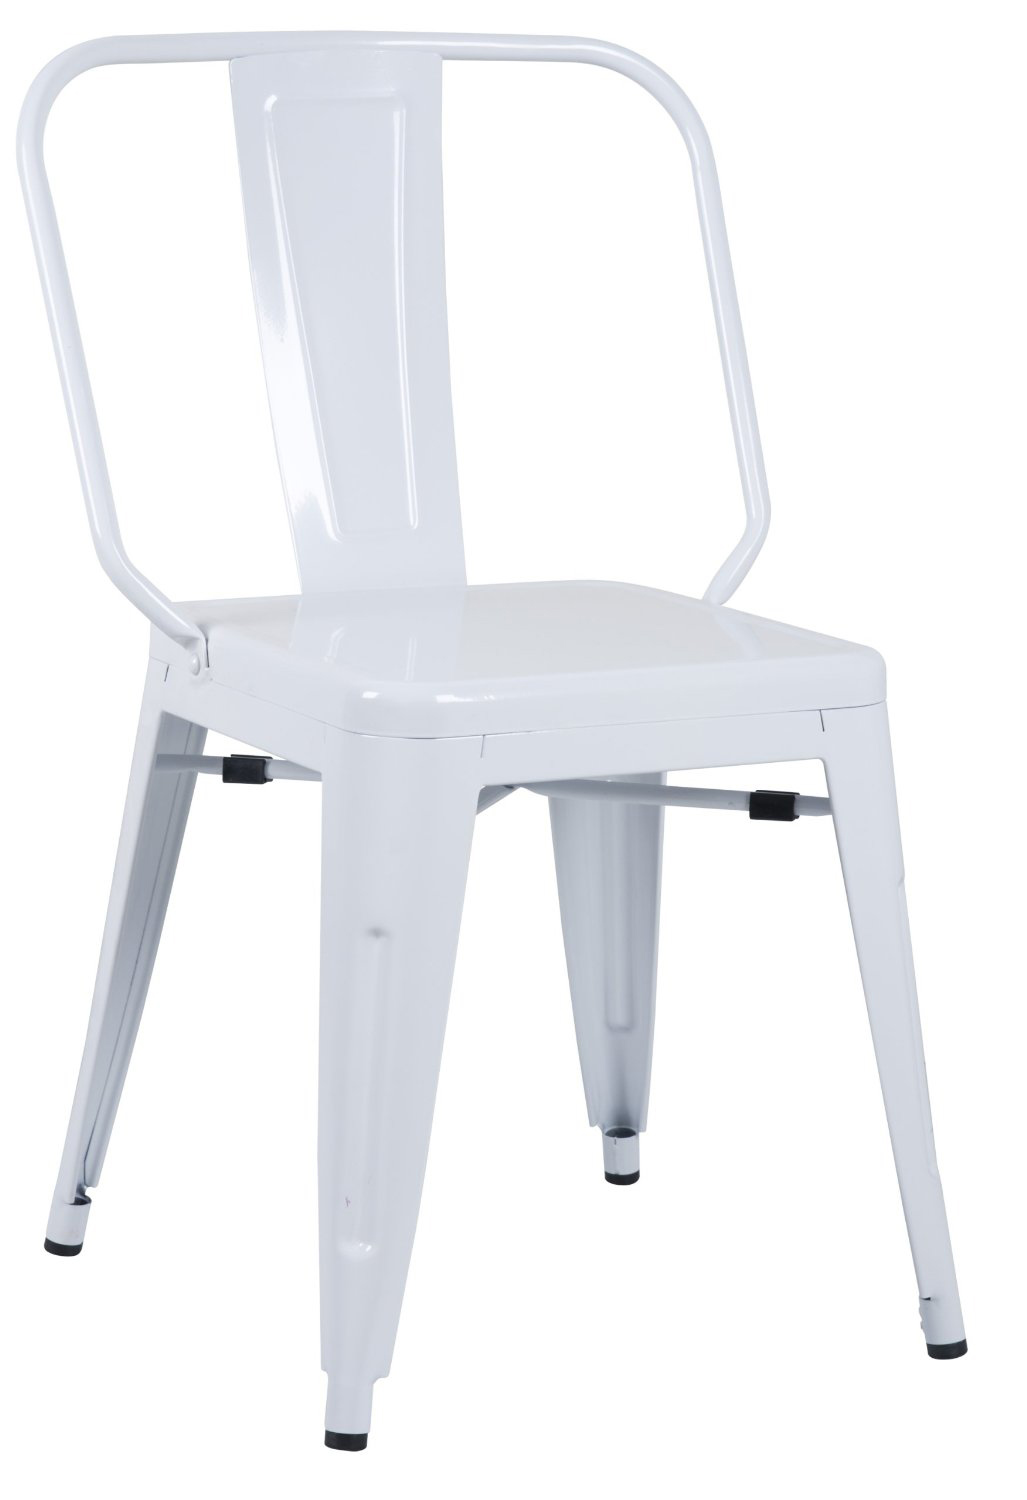 Chintaly Imports 8023 Galvanized Steel Side Chair - White